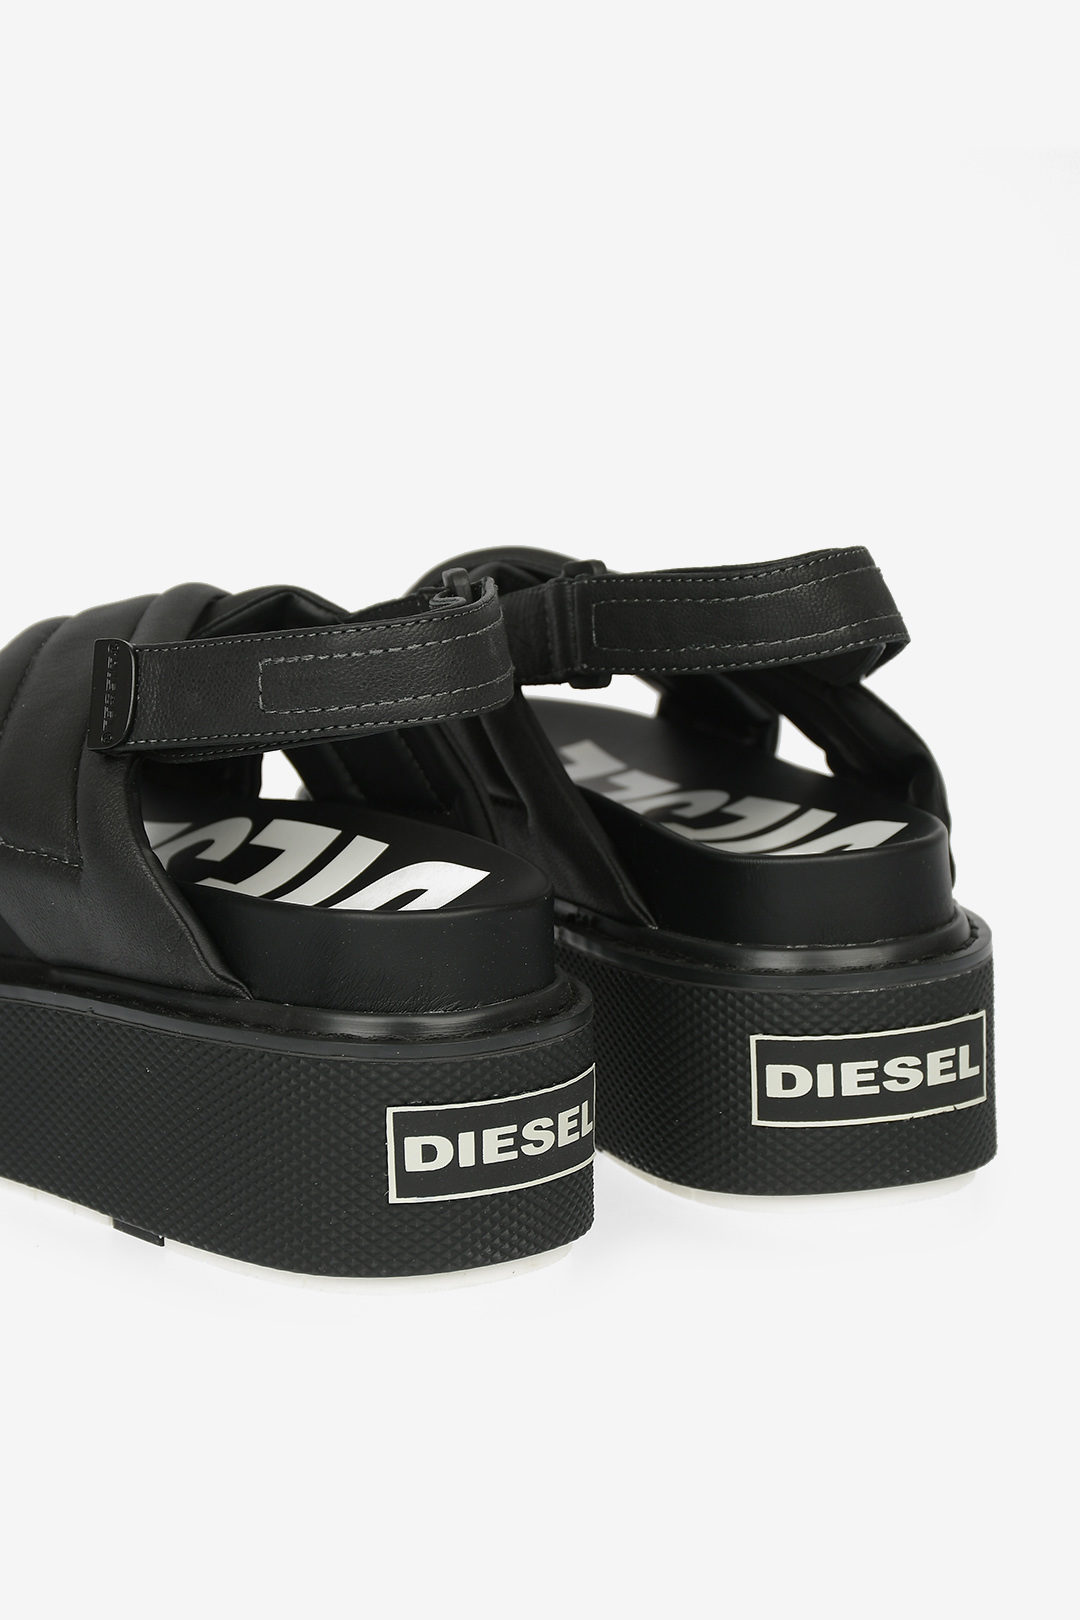 Diesel 5cm Leather SA-SCIROCCO XR Sandal with Wedge women 